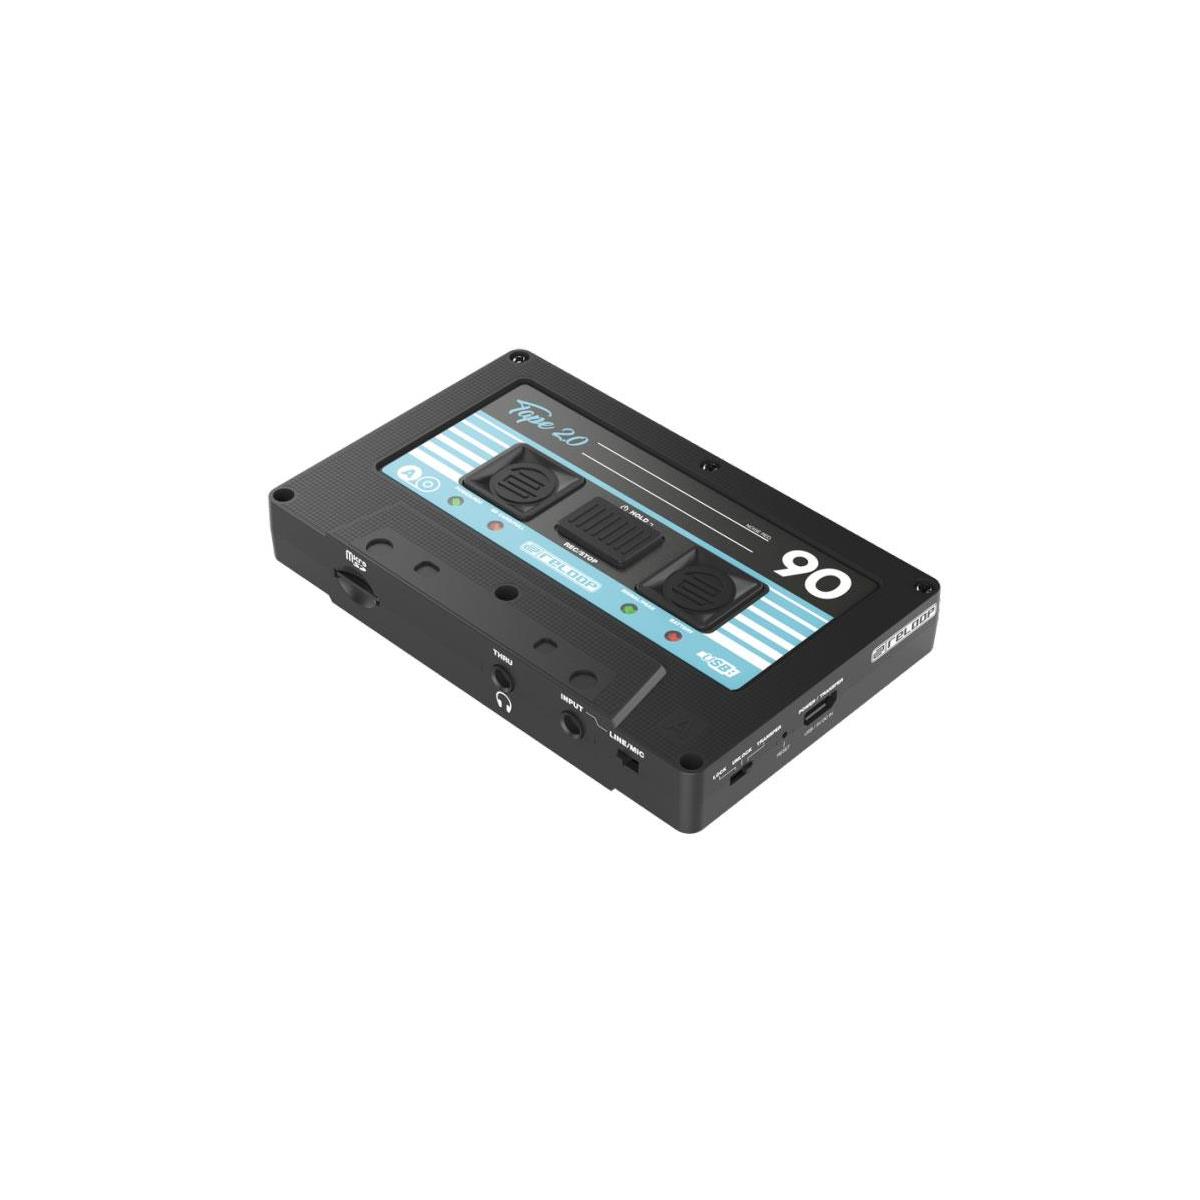 Image of Reloop Tape 2 USB Mixtape Recorder with Retro Cassette Look for DJs